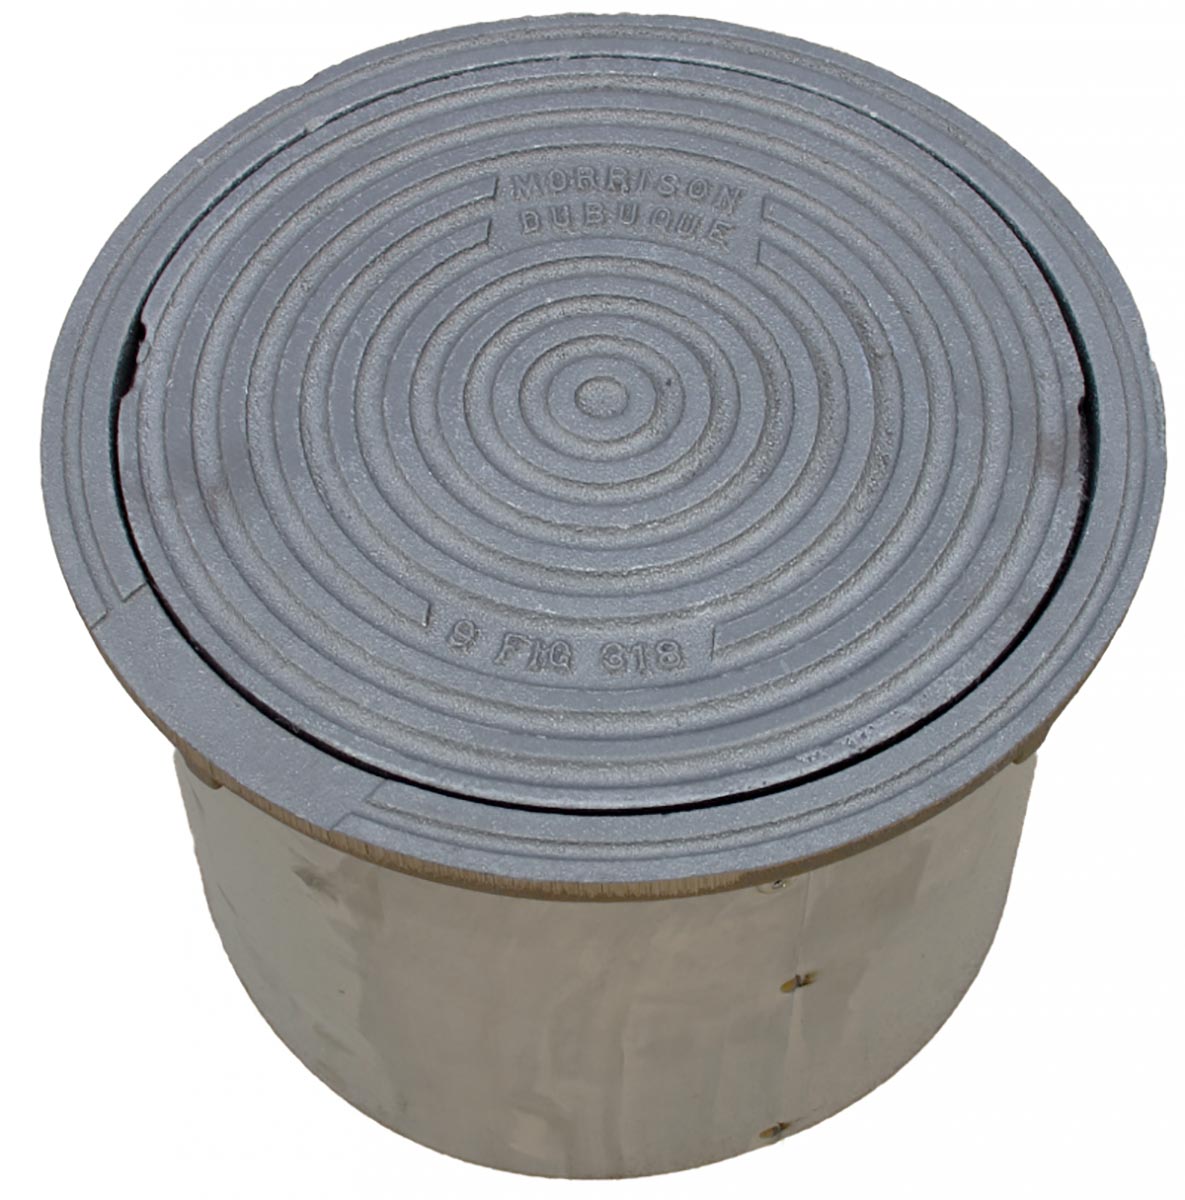 12" X 12" ROUND MANHOLE (NON-BOLTED)